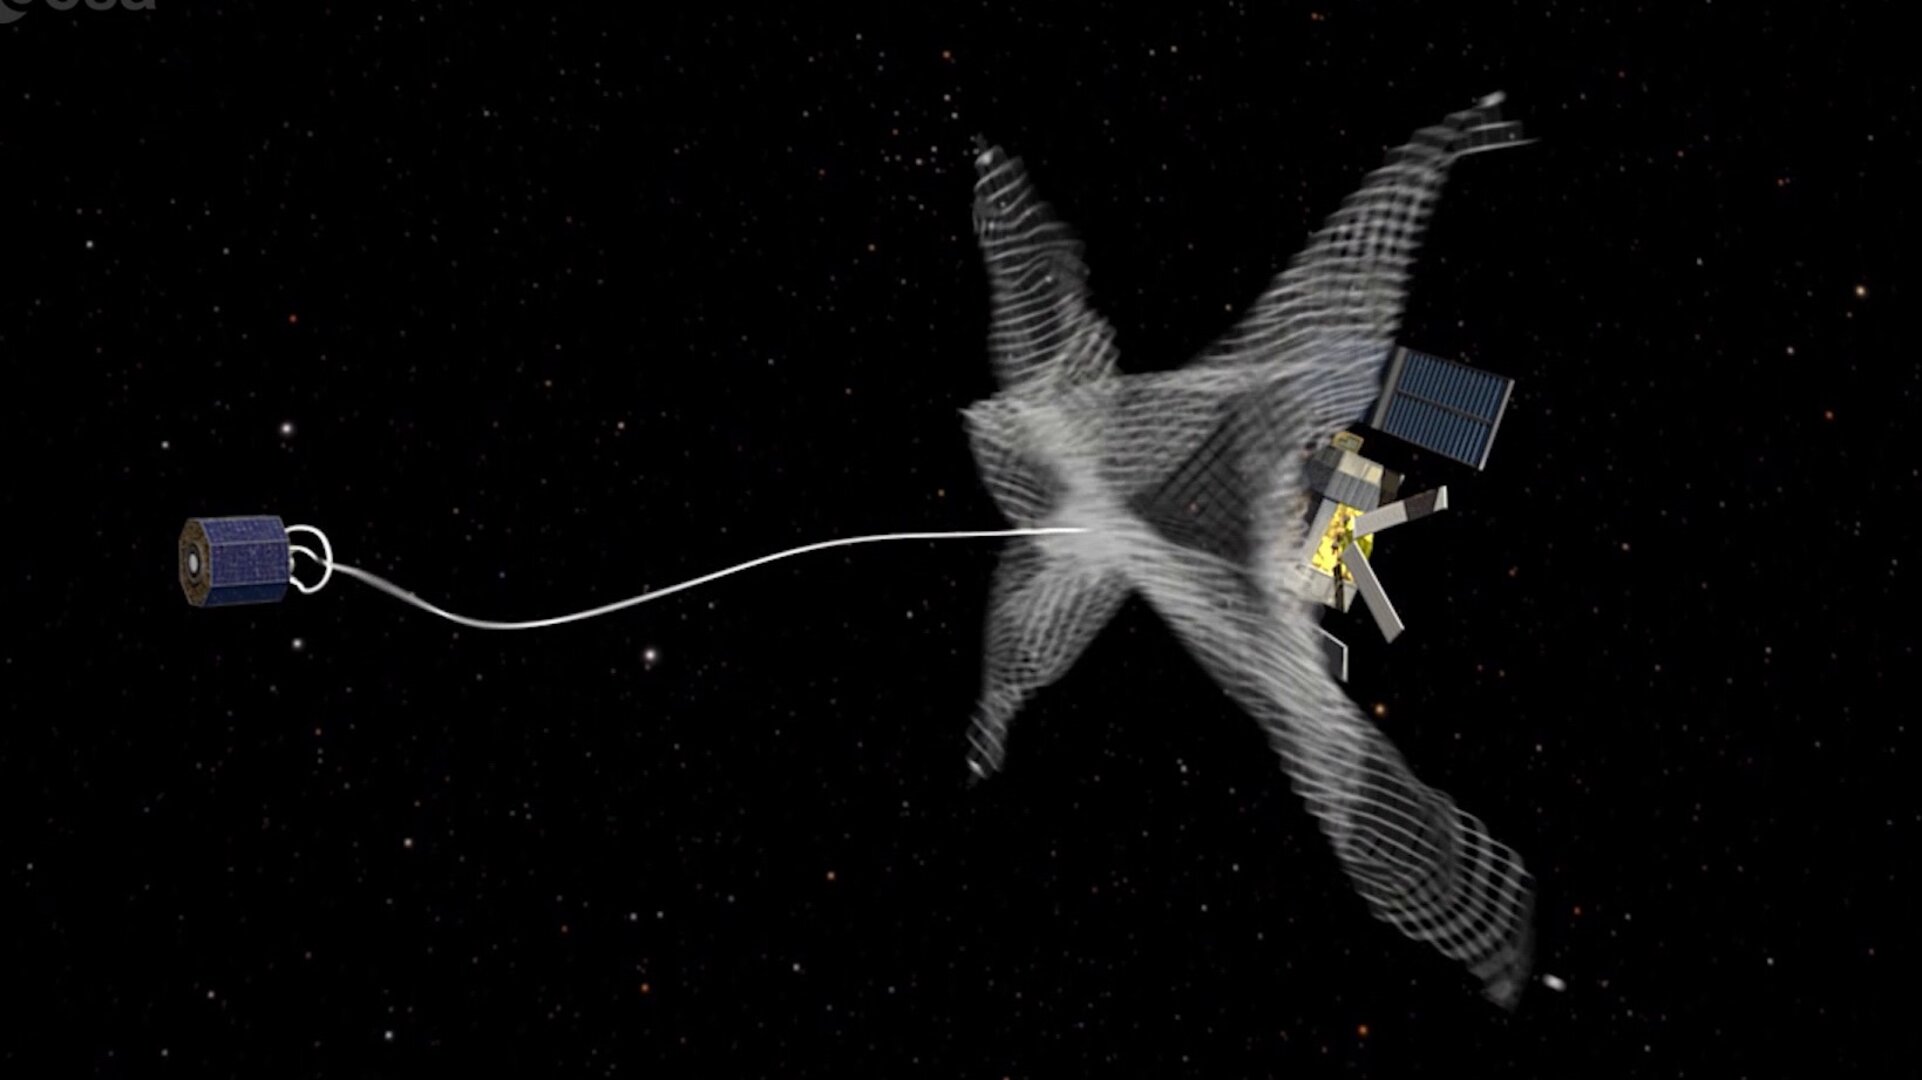 a spacecraft shoots out a net on a tether at a piece of metal junk in space